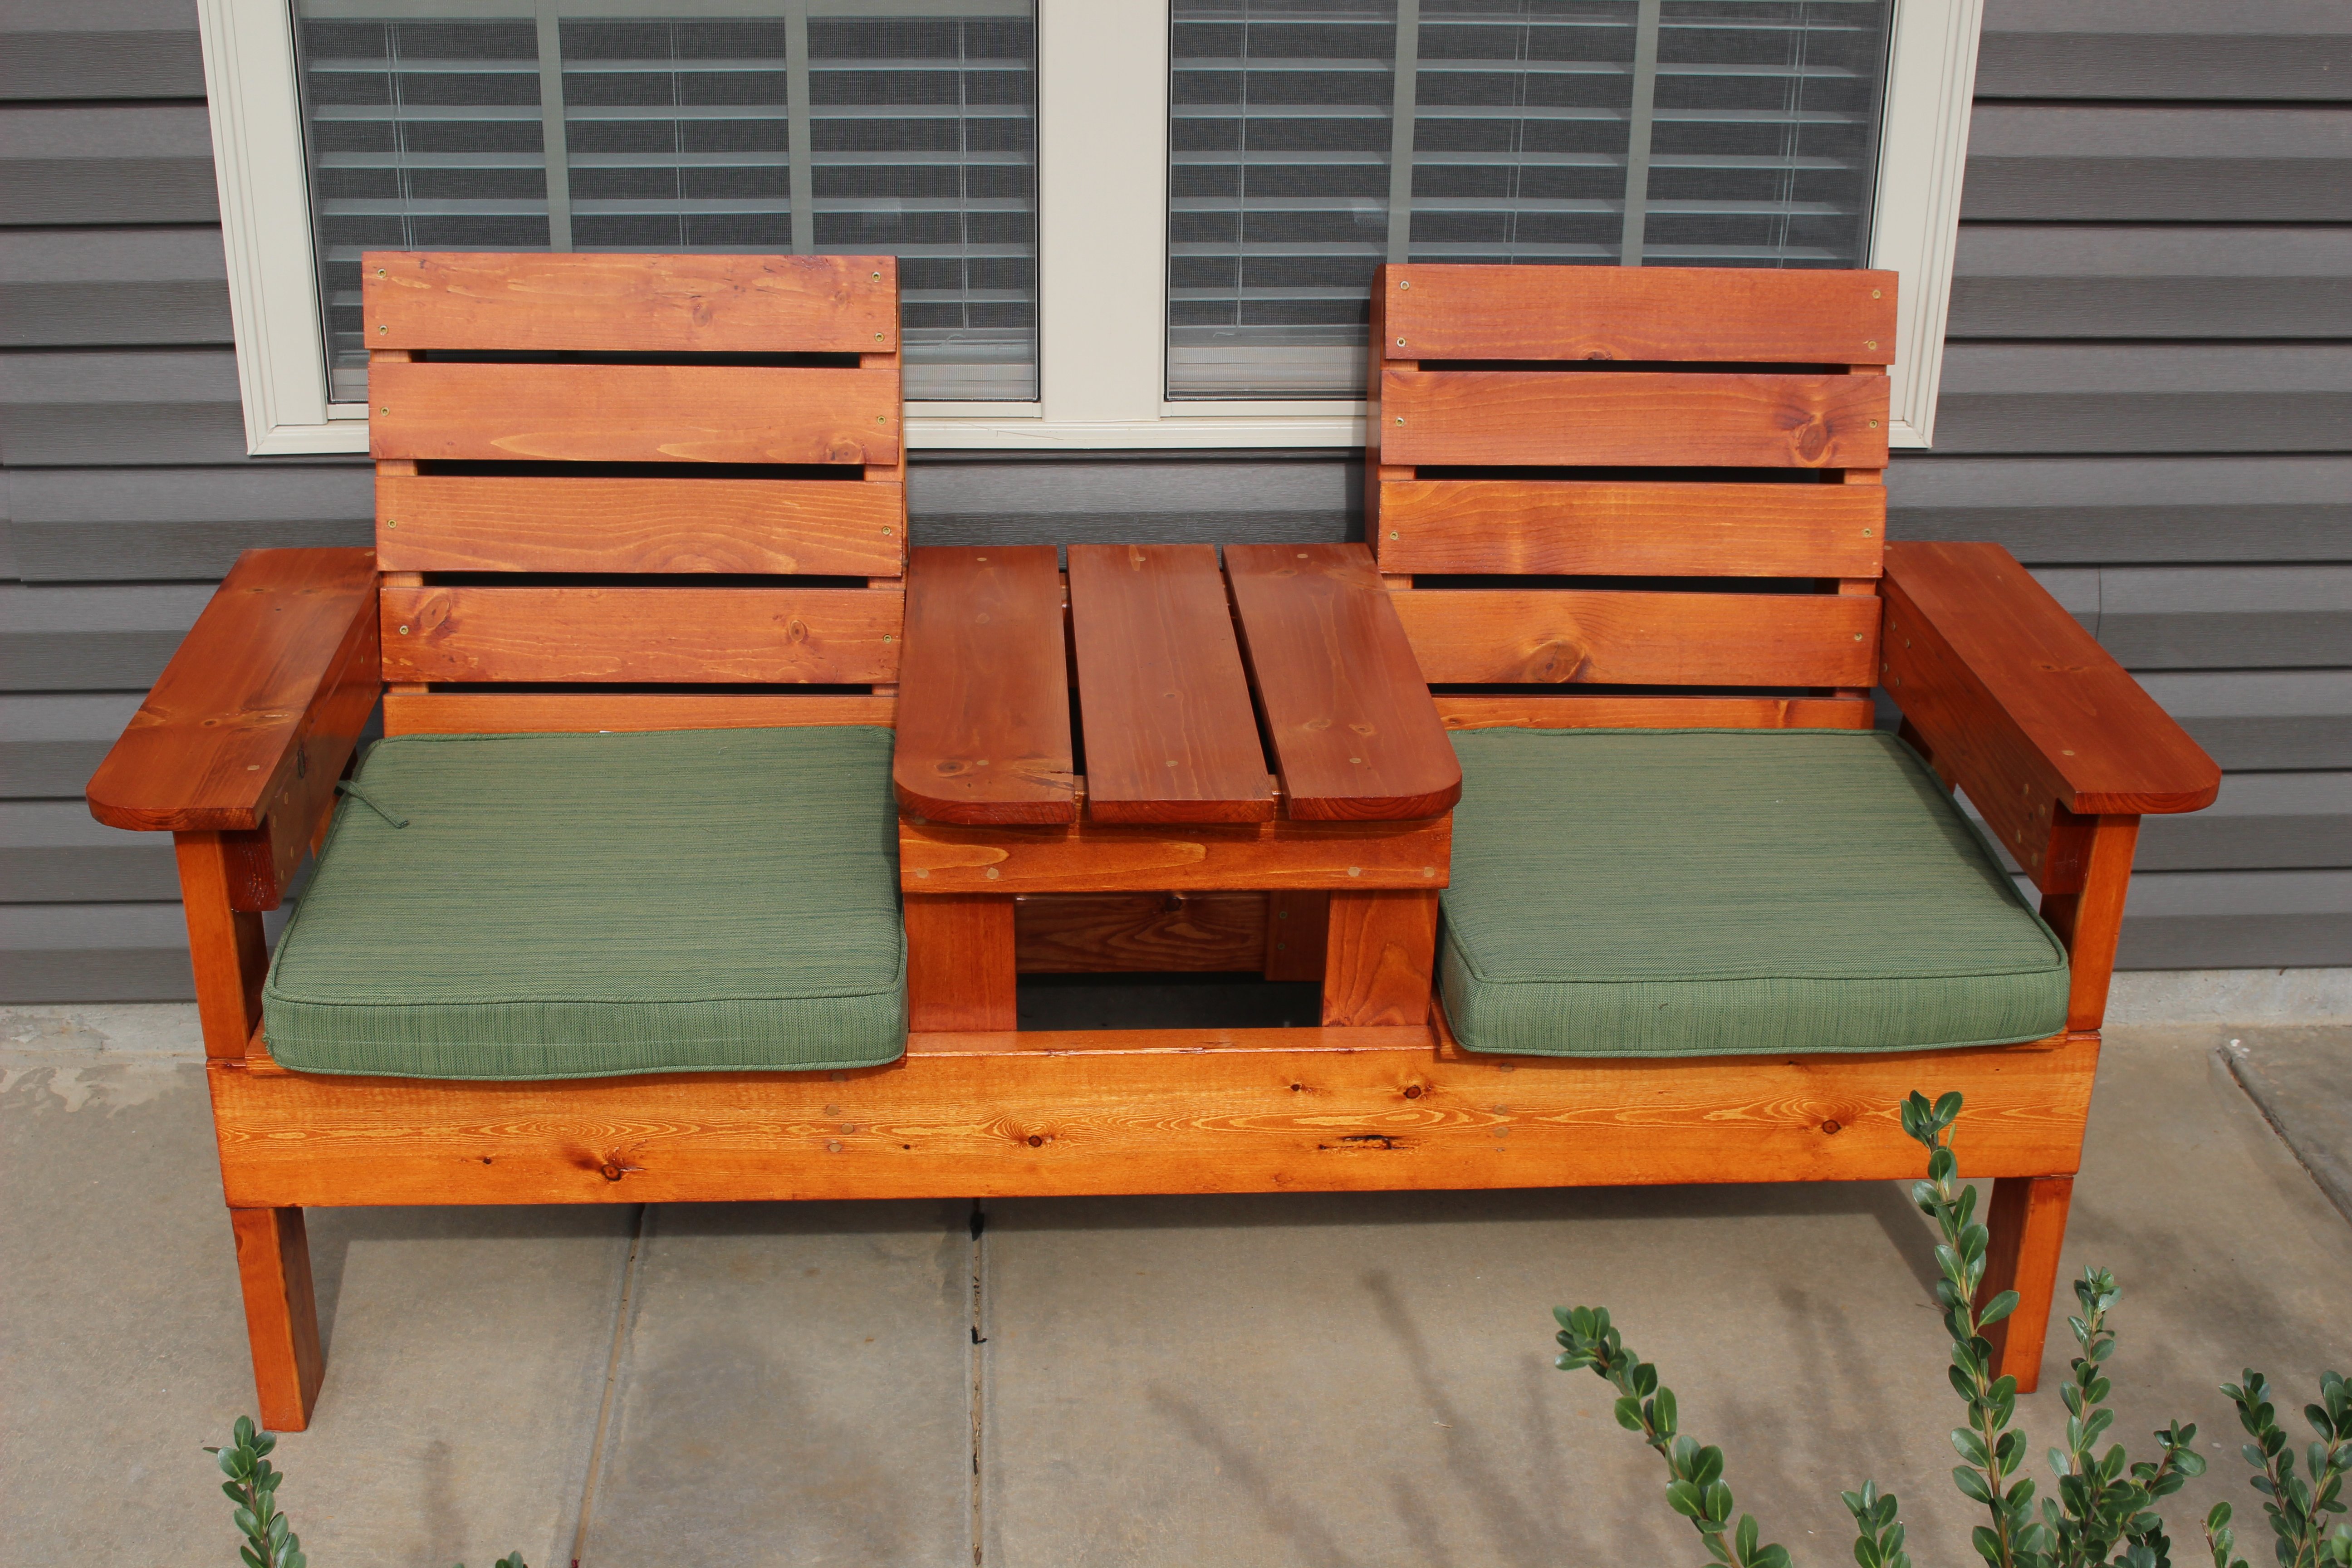 Double Chair Bench Ana White